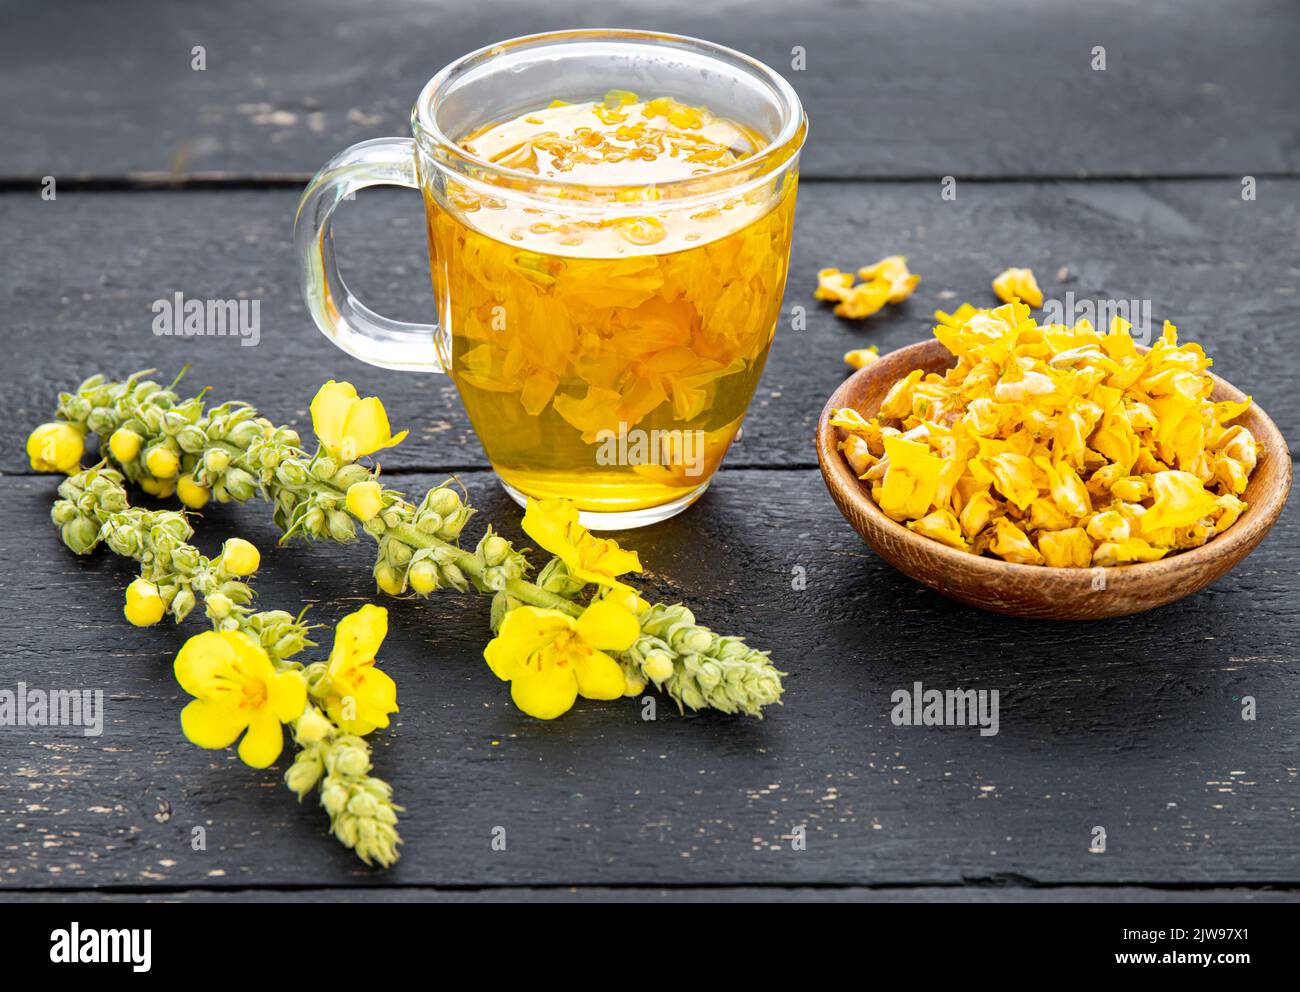 Herbal medicinal tea drink made of Verbascum thapsus, the great mullein, greater mullein or common mullein. Yellow dried flower petals. Glass cup. Stock Photo